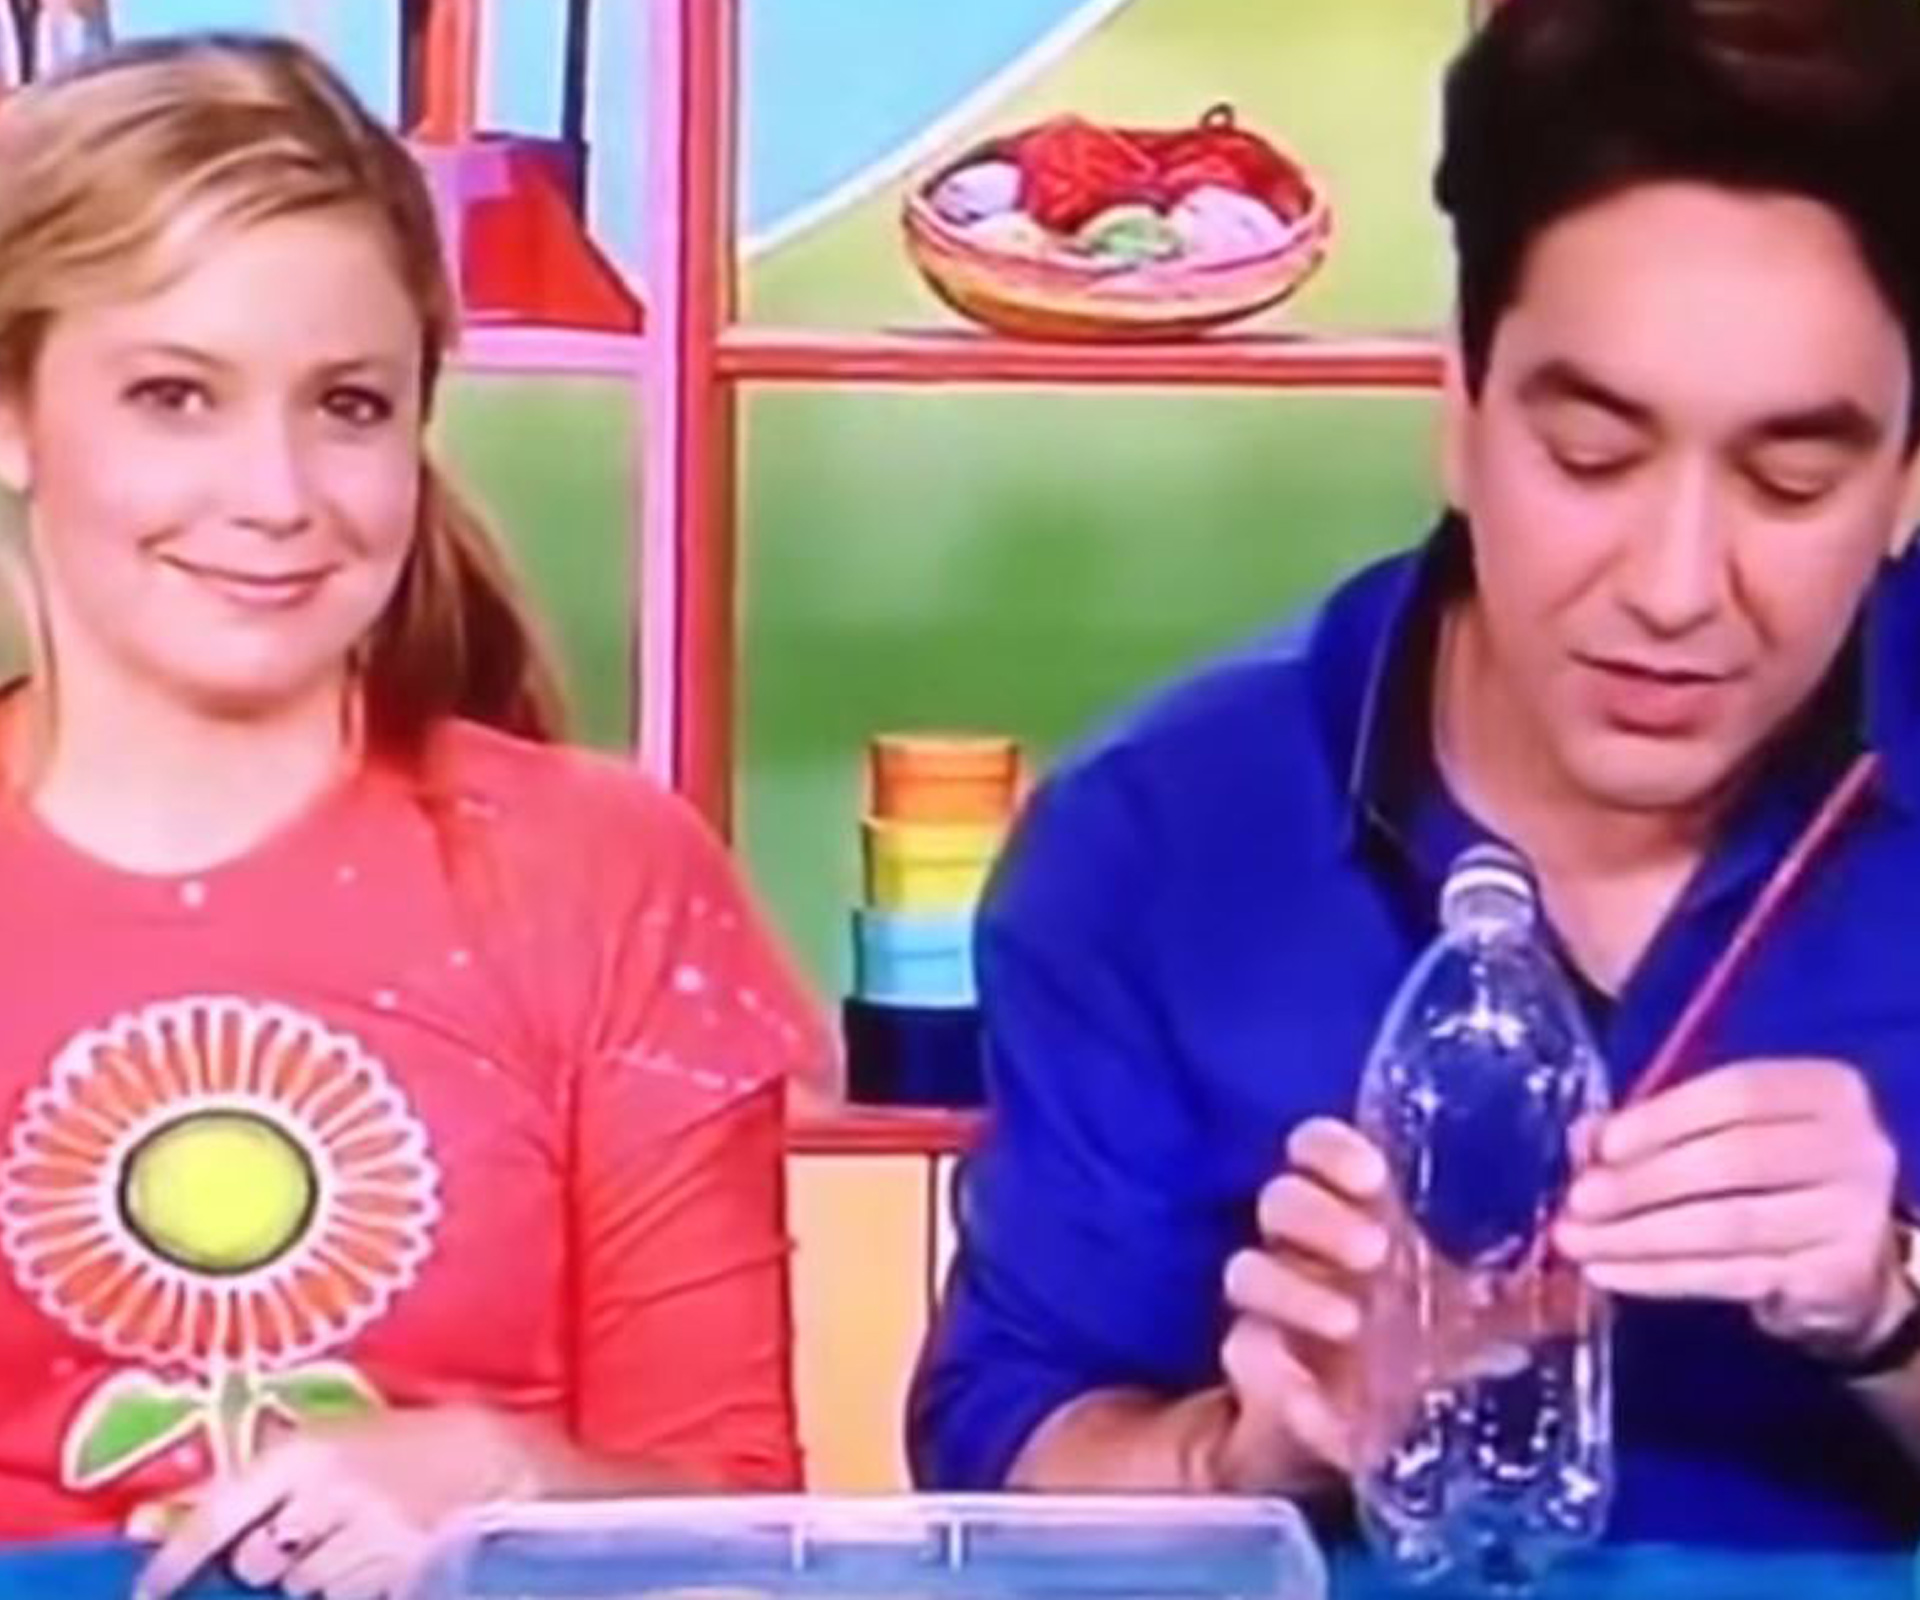 Did Alex Papps just make a bong on Play School?